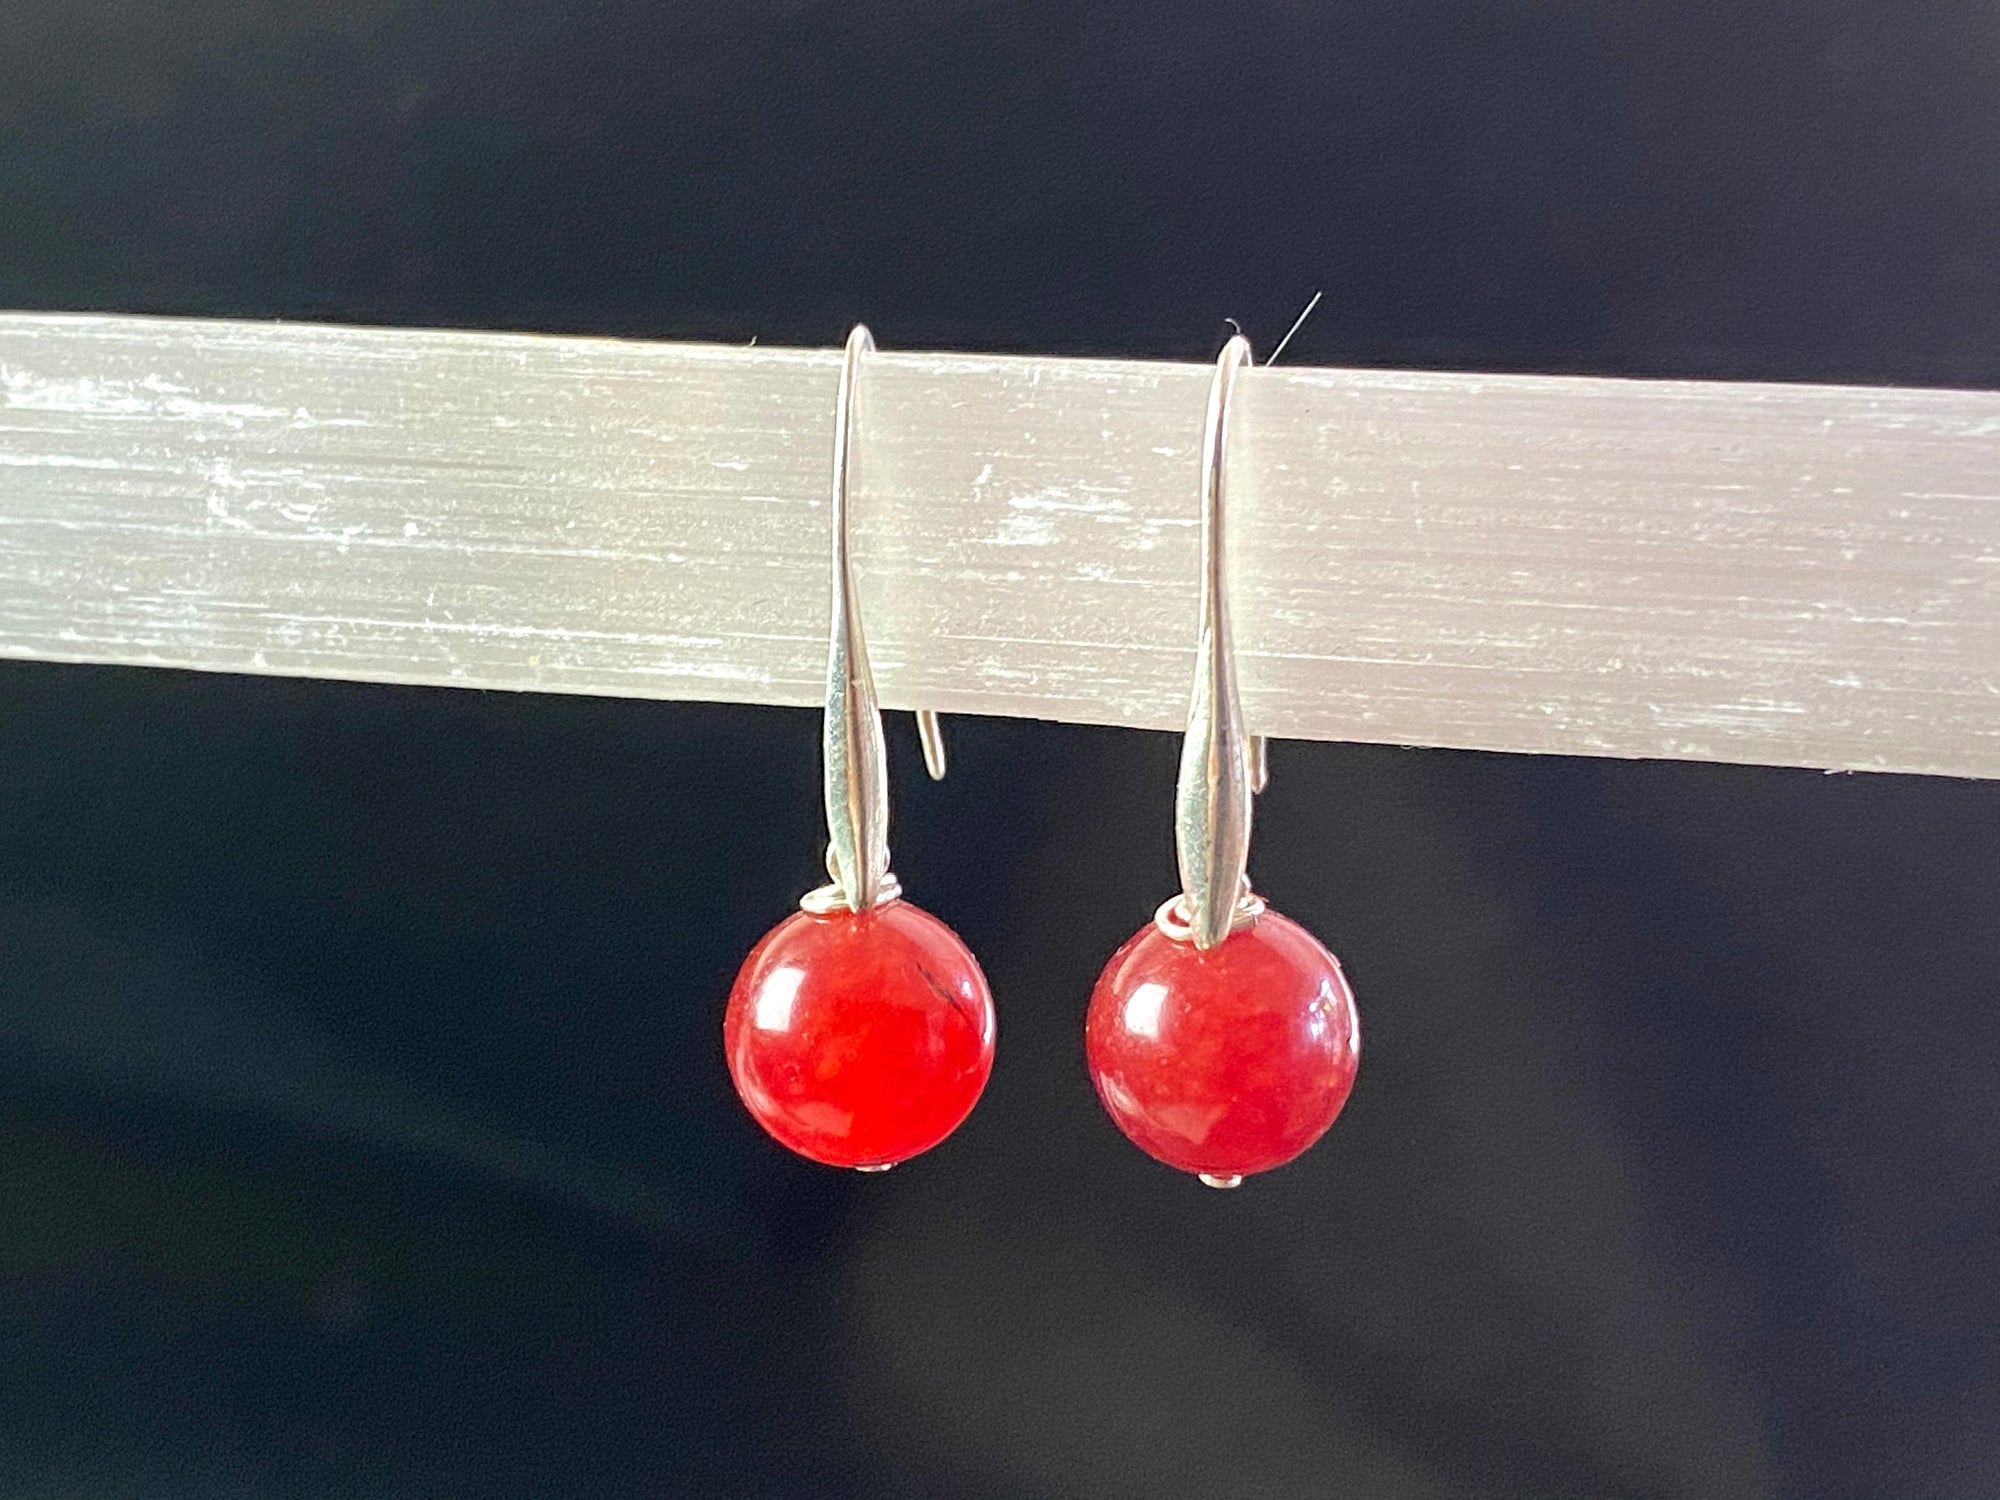 Carnelian balls and sterling silver sheperd hooks for a very elegant and simple earring